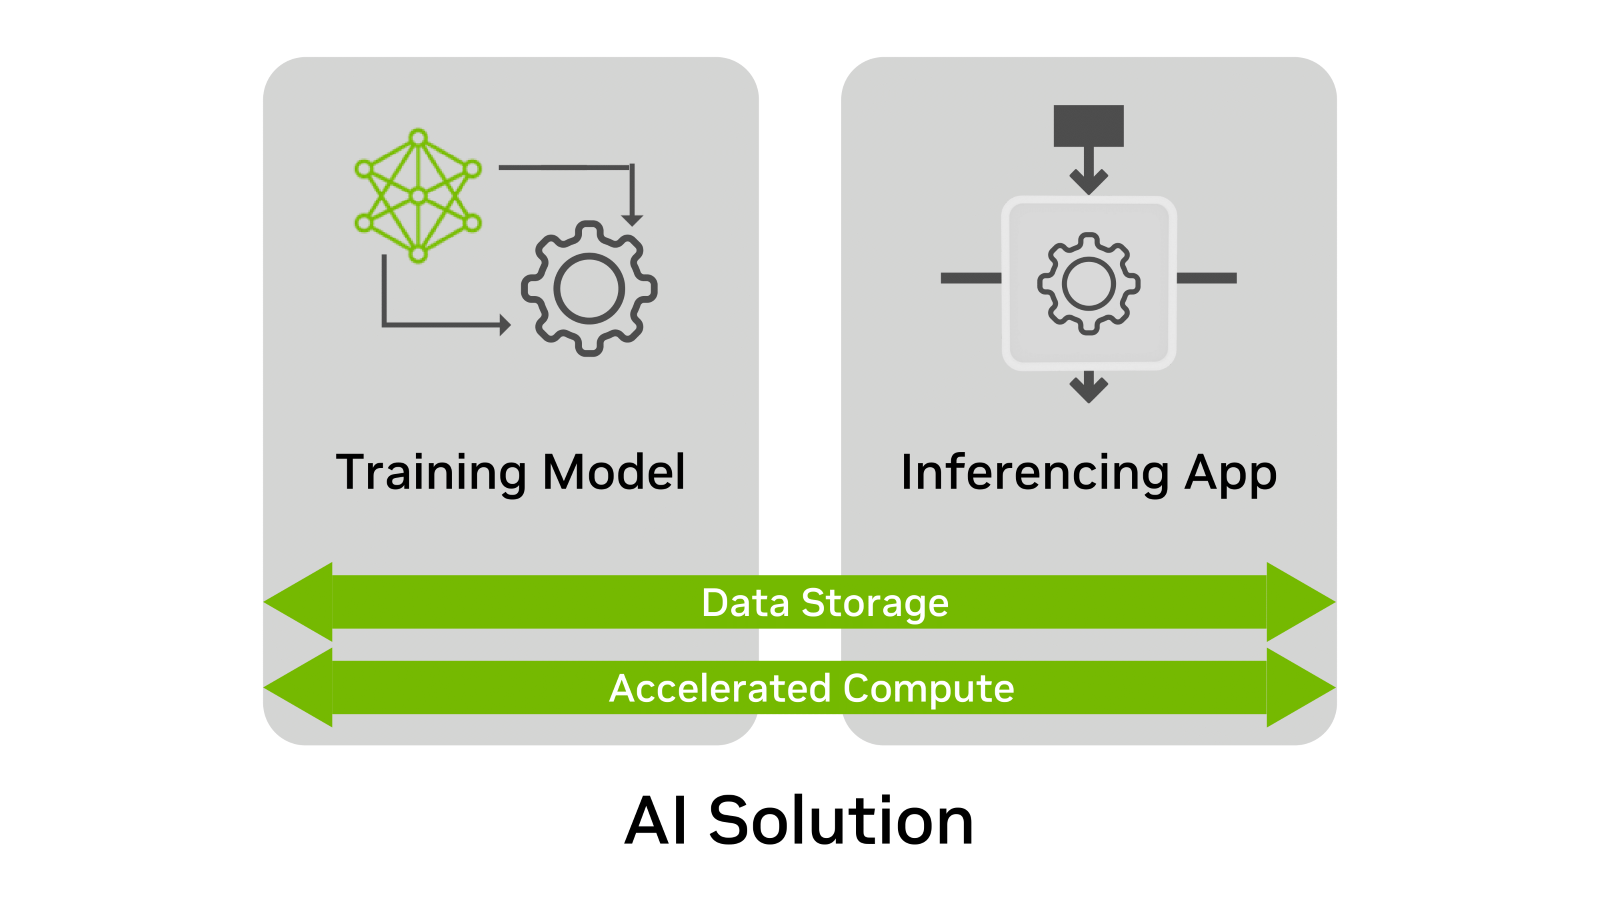 The diagram shows how data storage and accelerated compute is the foundation that makes model training and inferencing apps possible.